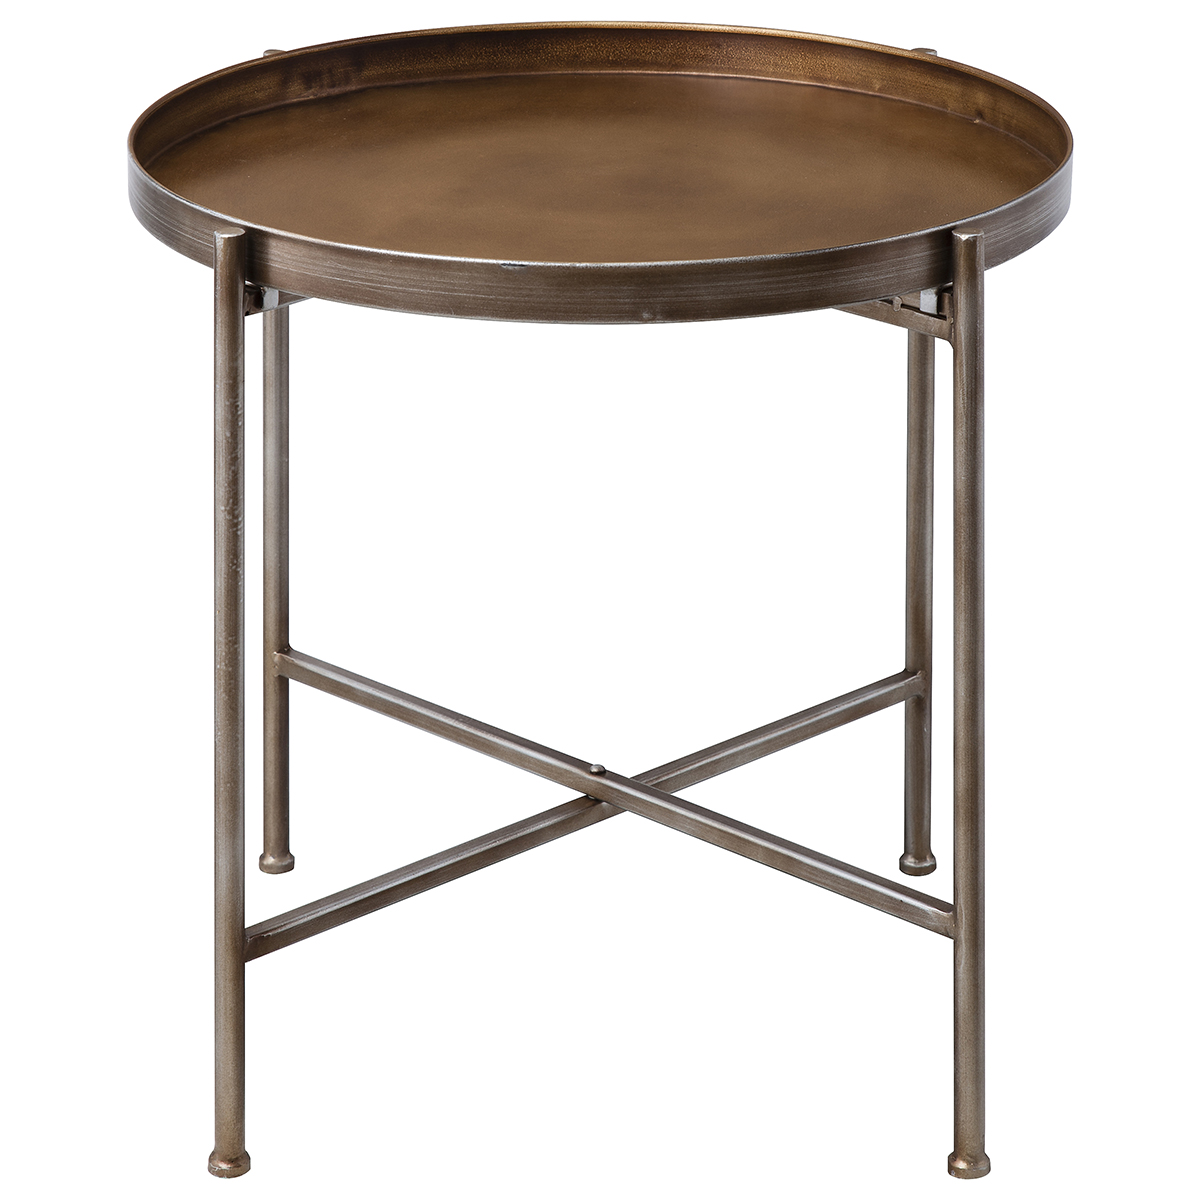 Gallery Direct Lenox Tray Table